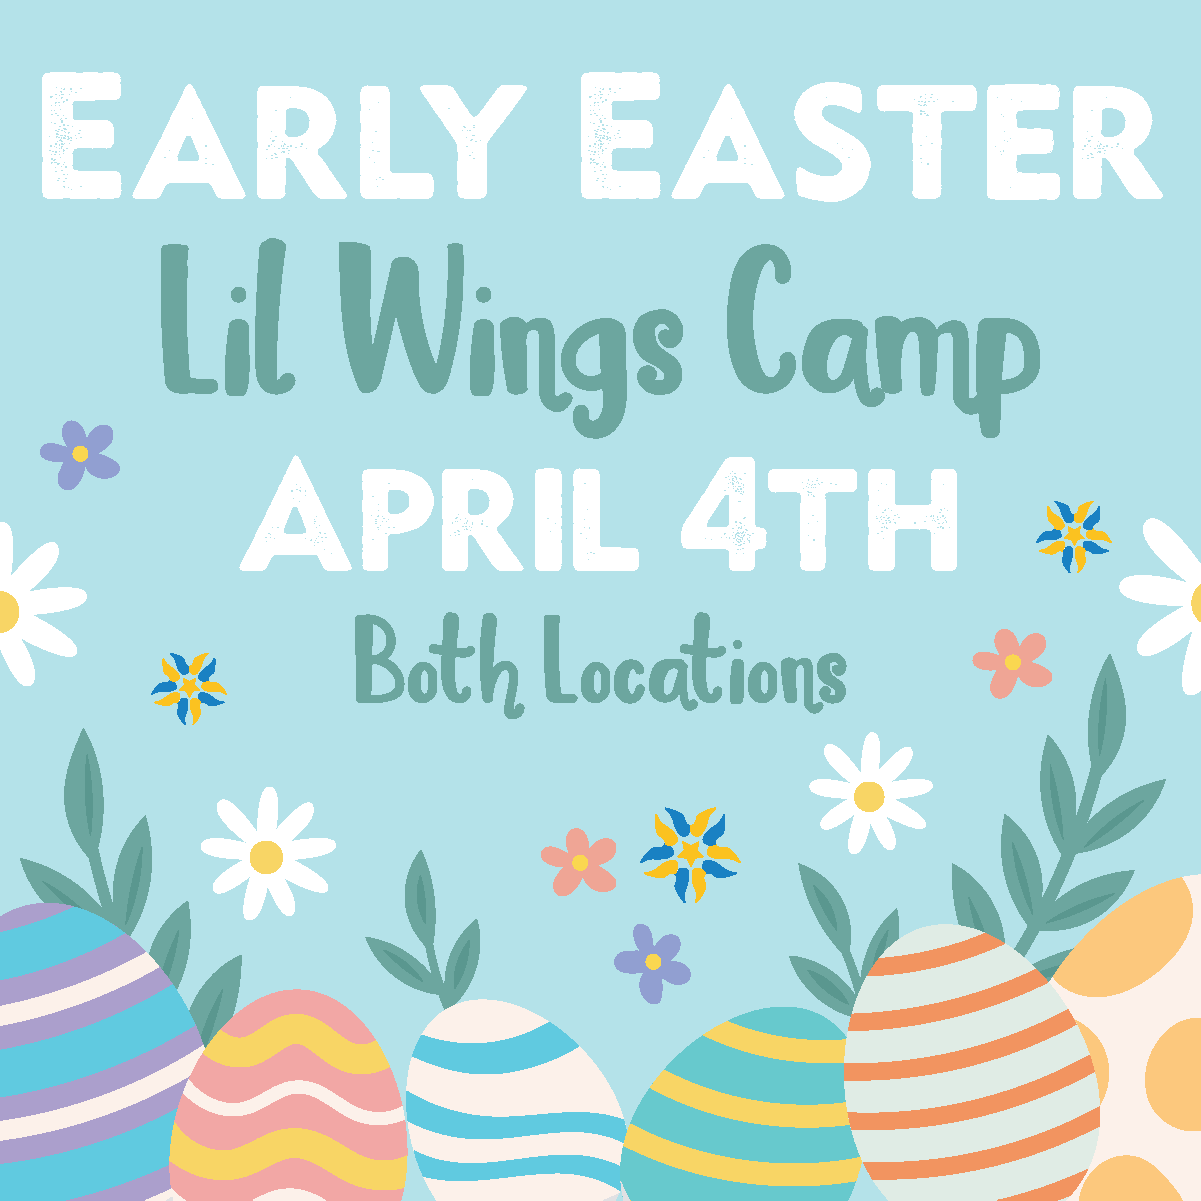 Preschoolers can celebrate an Early Easter with our Lil Wings Camp on April 4th!